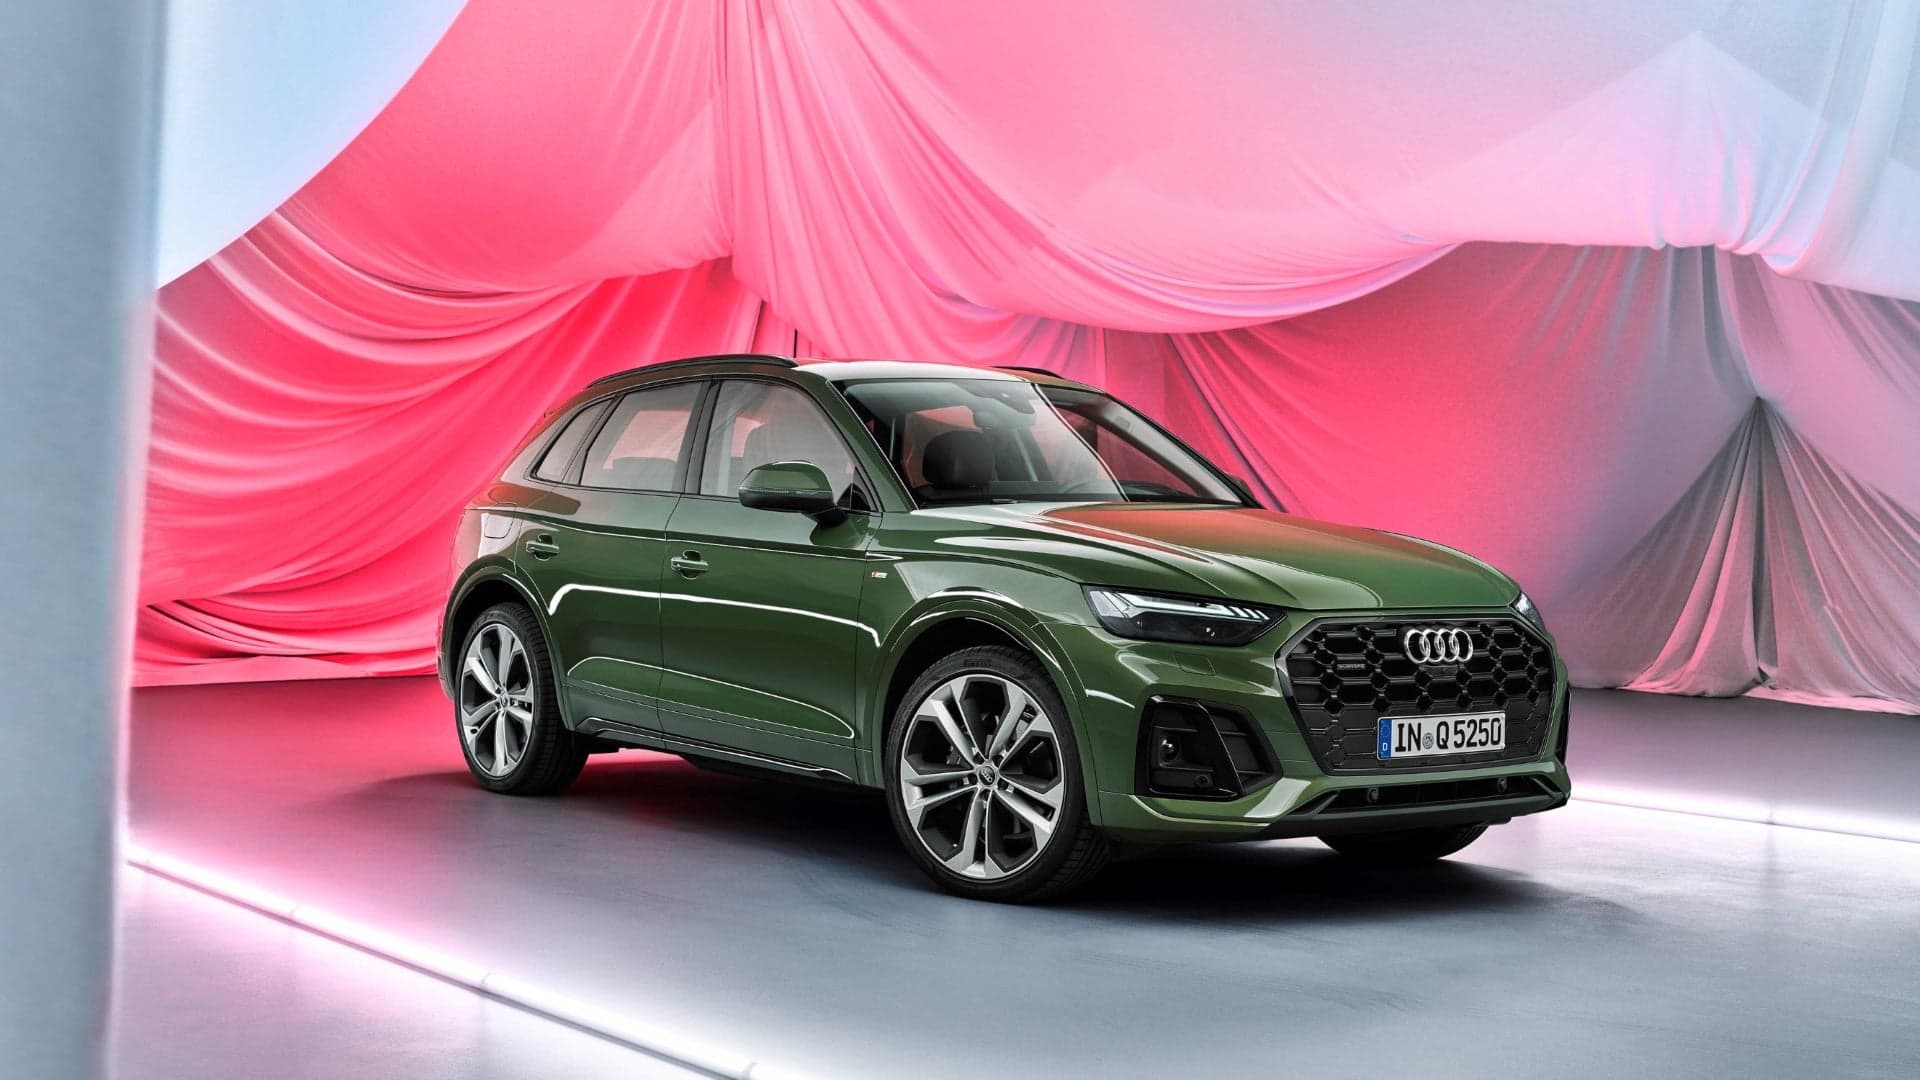 2021 Audi Q5: Money-Making Crossover Gets New Face, 13-HP Bump